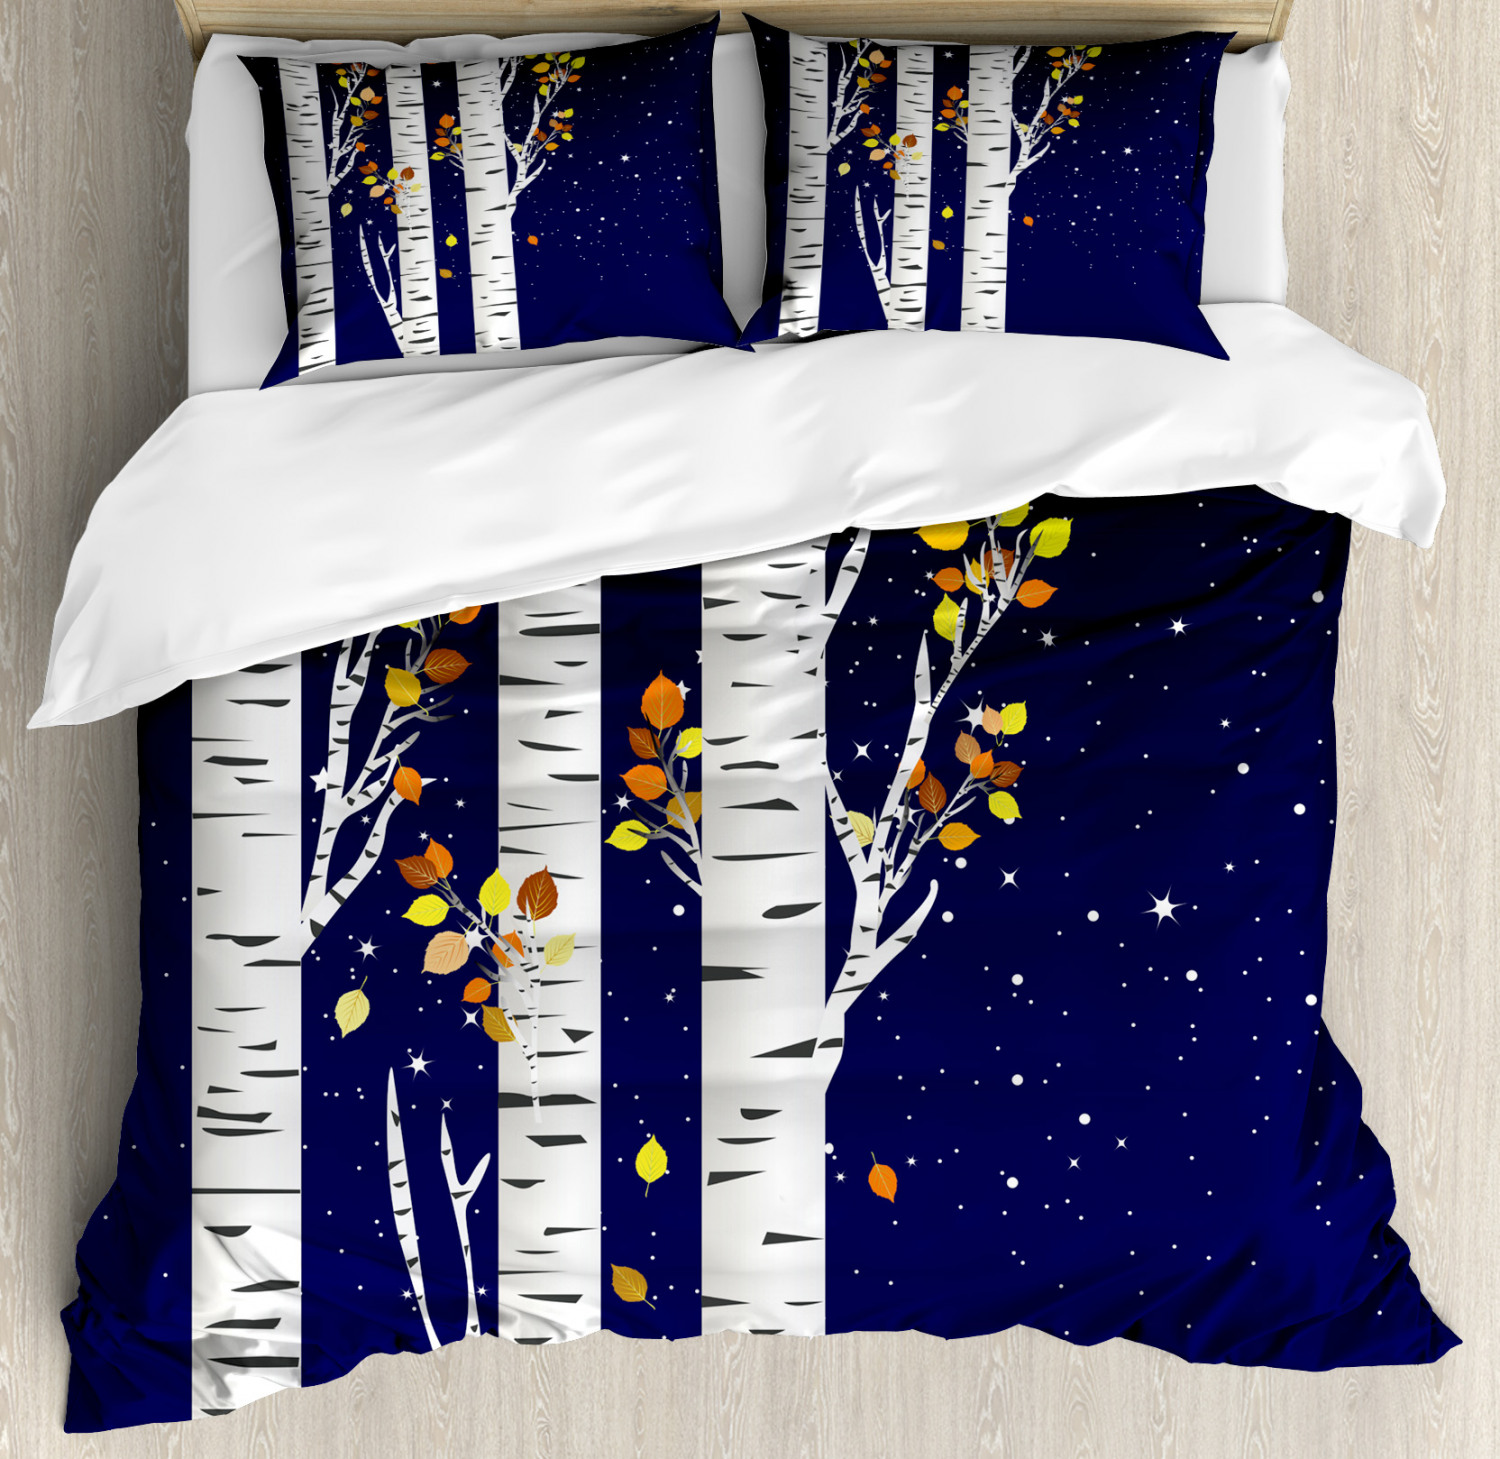 Autumn Duvet Cover Set With Pillow Shams Birch Trees With Foliage